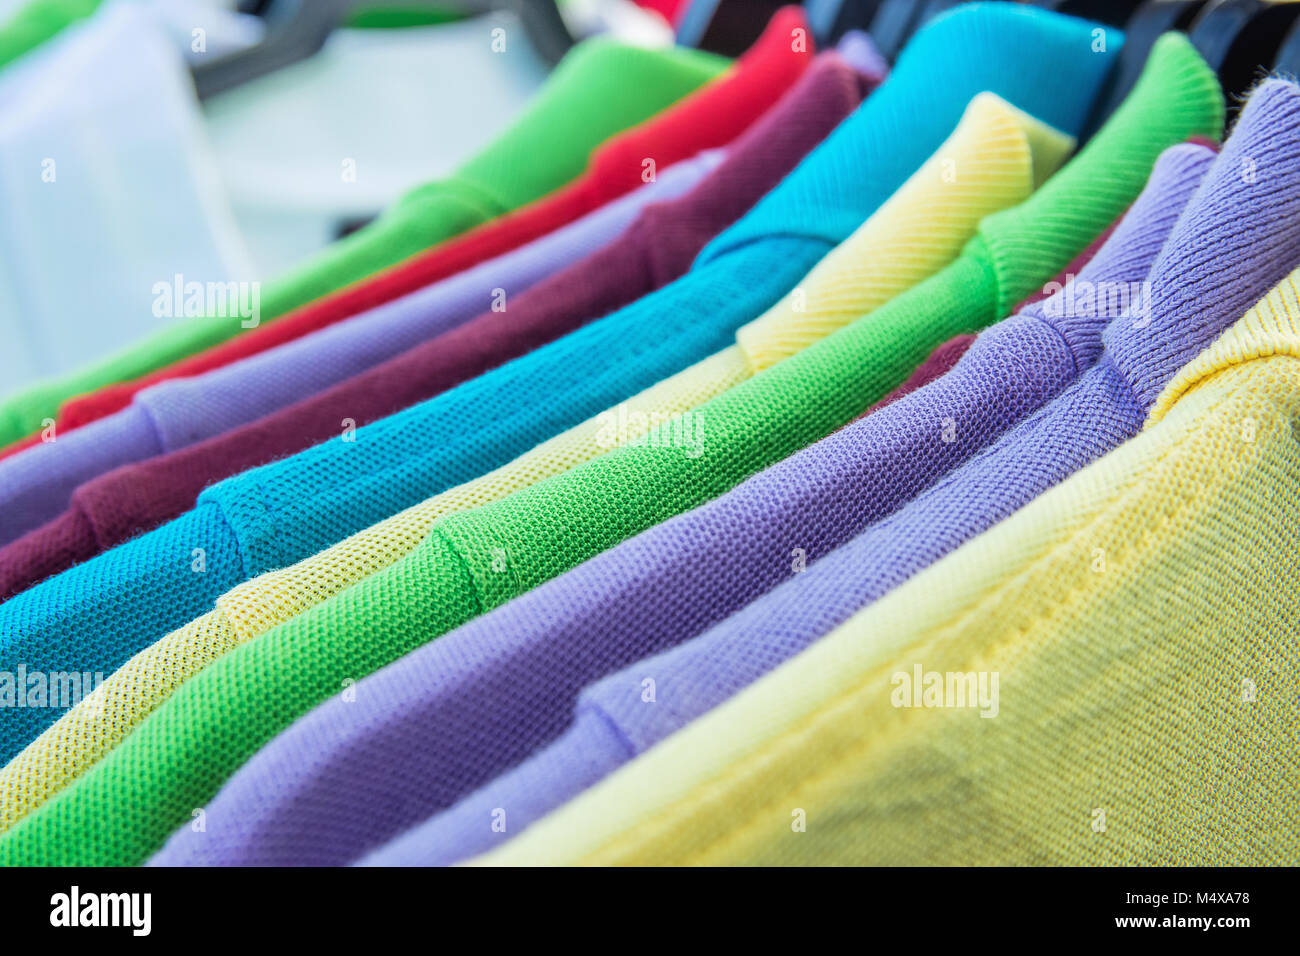 Cotton Polo Shirts of Various Colors Blue Yellow Red Purple Green White Hanging on Hangers on Rack in Clothing Store. Sales Retail Consumerism Fashion Stock Photo